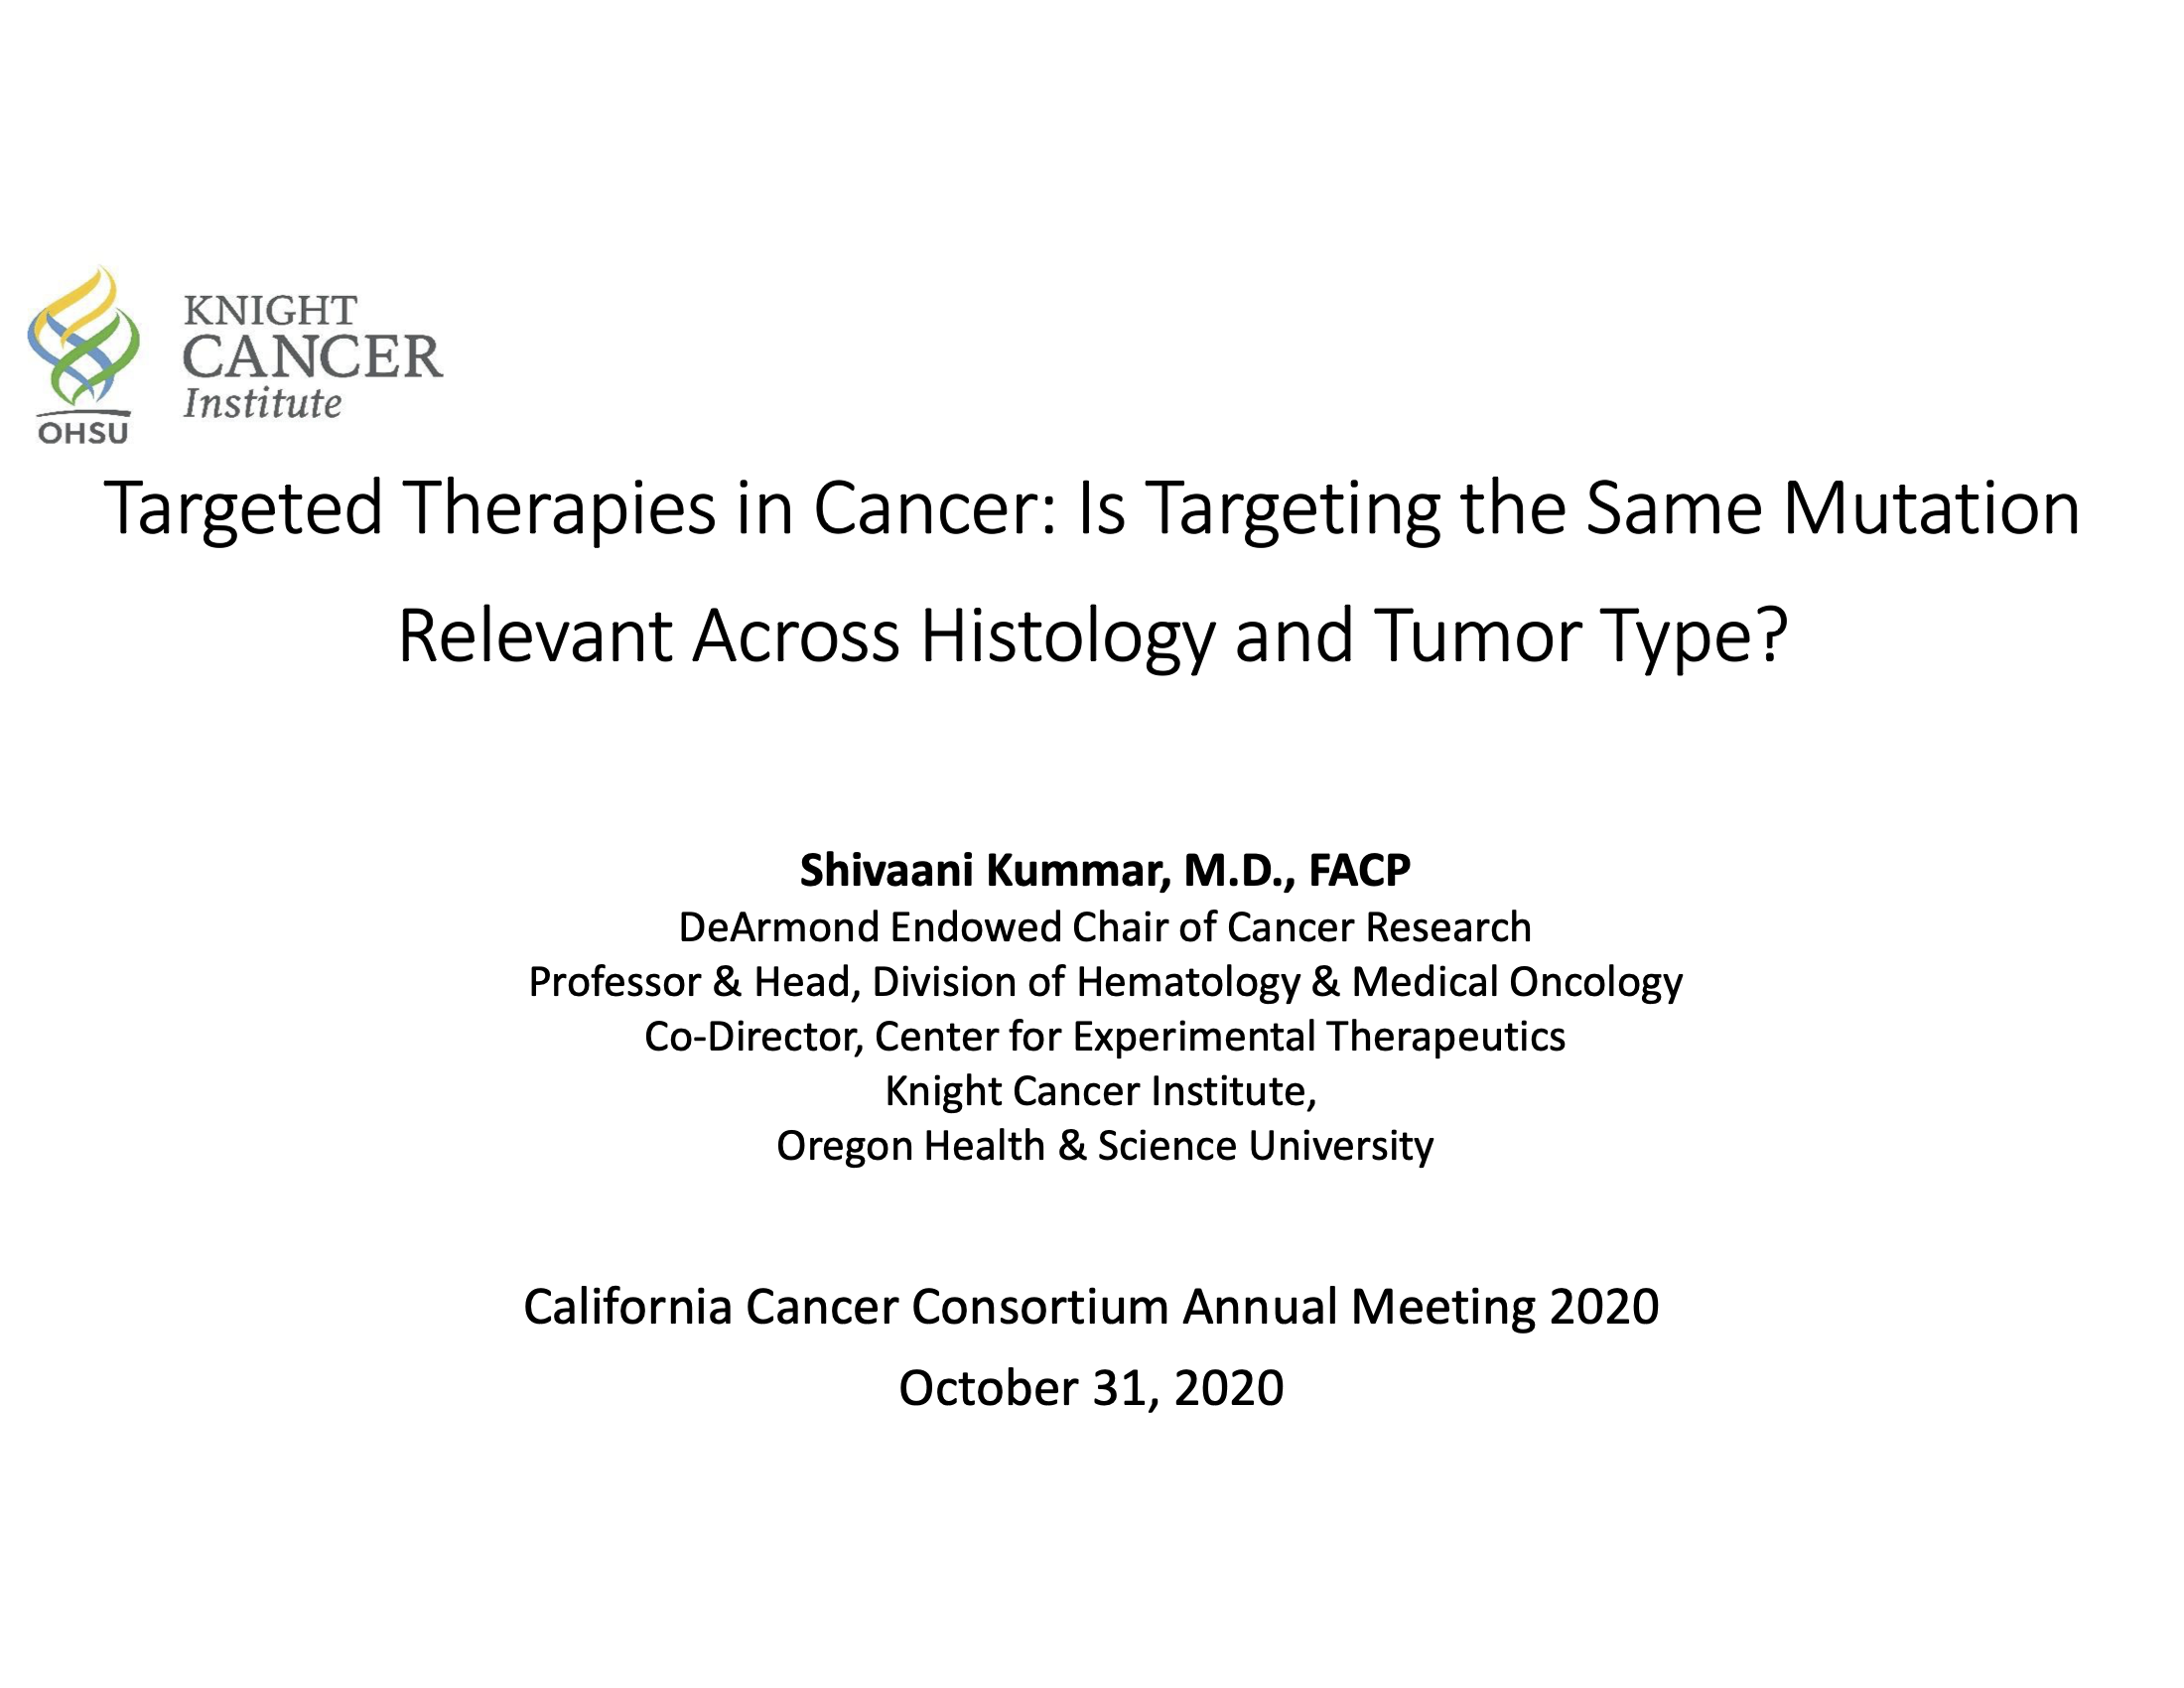 Targeted Therapies in Cancer: Is Targeting the Same Mutation Relevant Across Histology and Tumor Type?